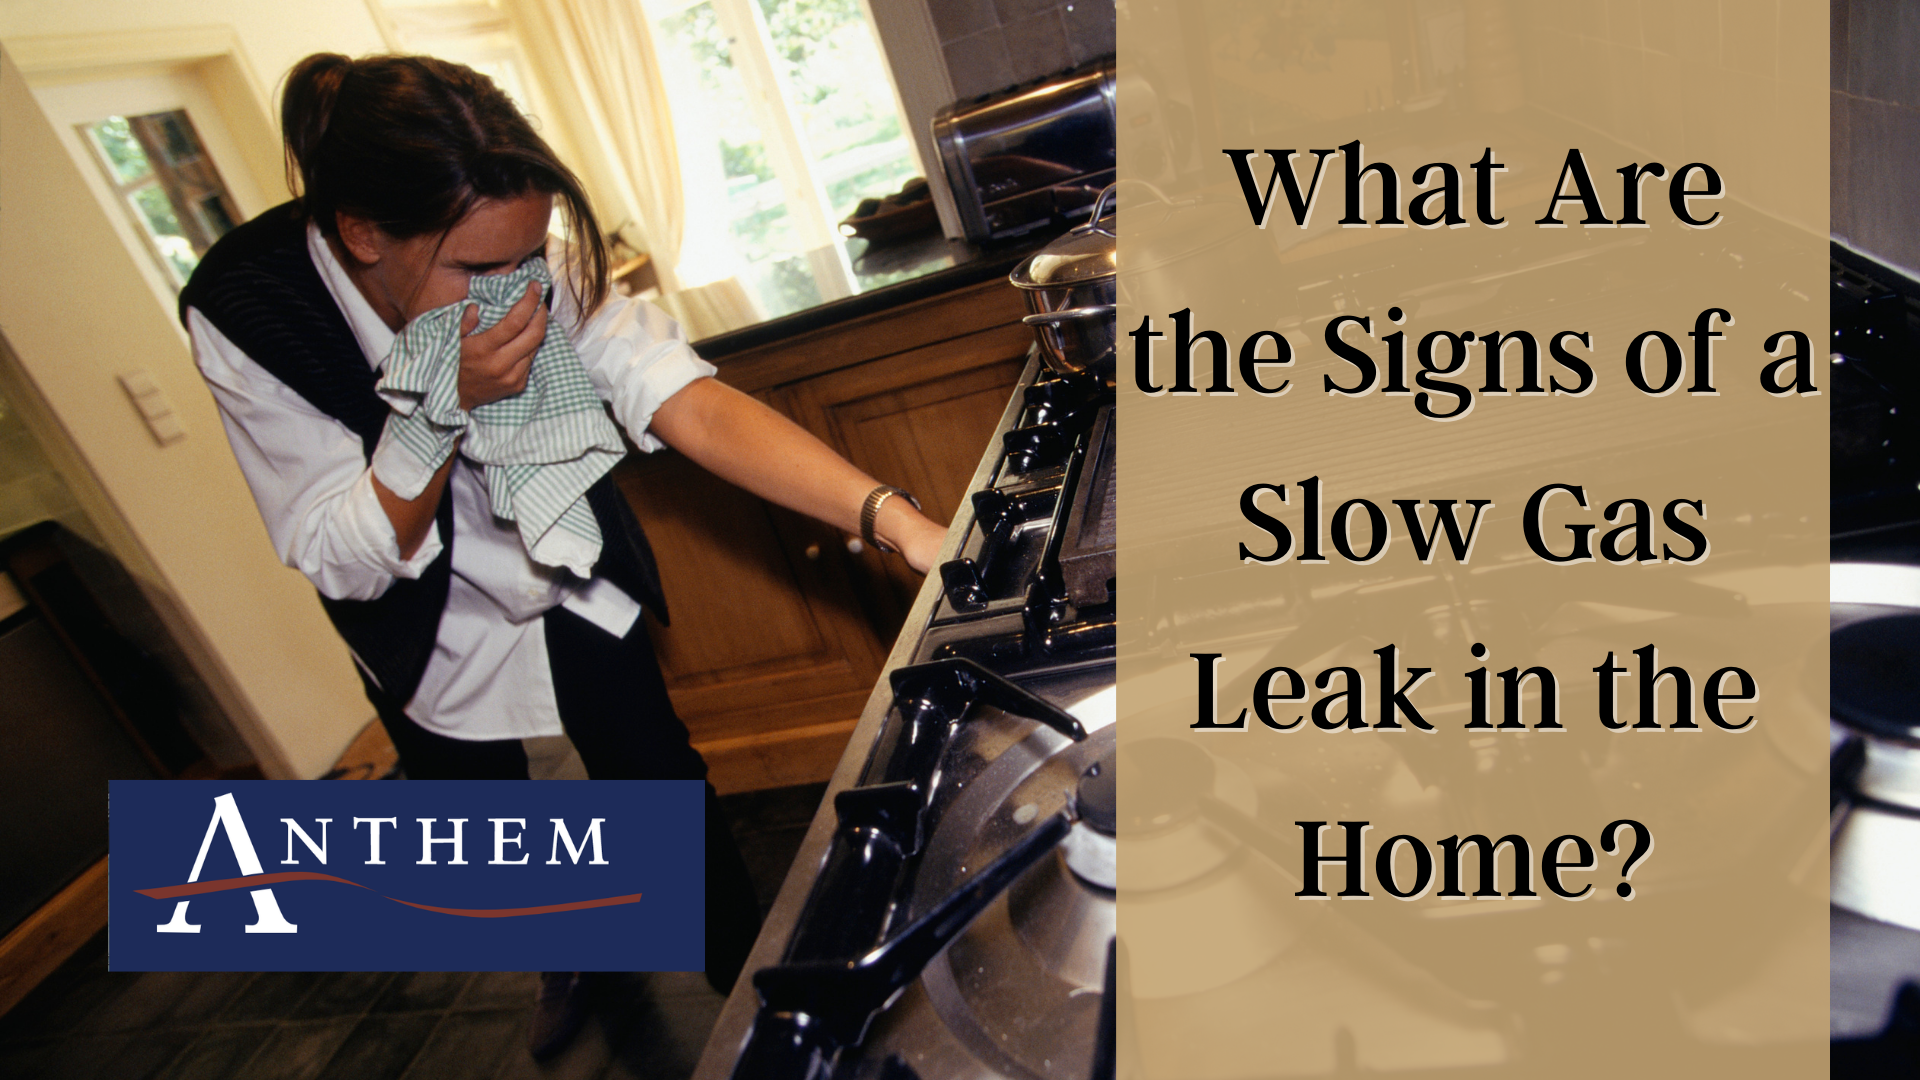 What Are the Signs of a Slow Gas Leak in the Home?